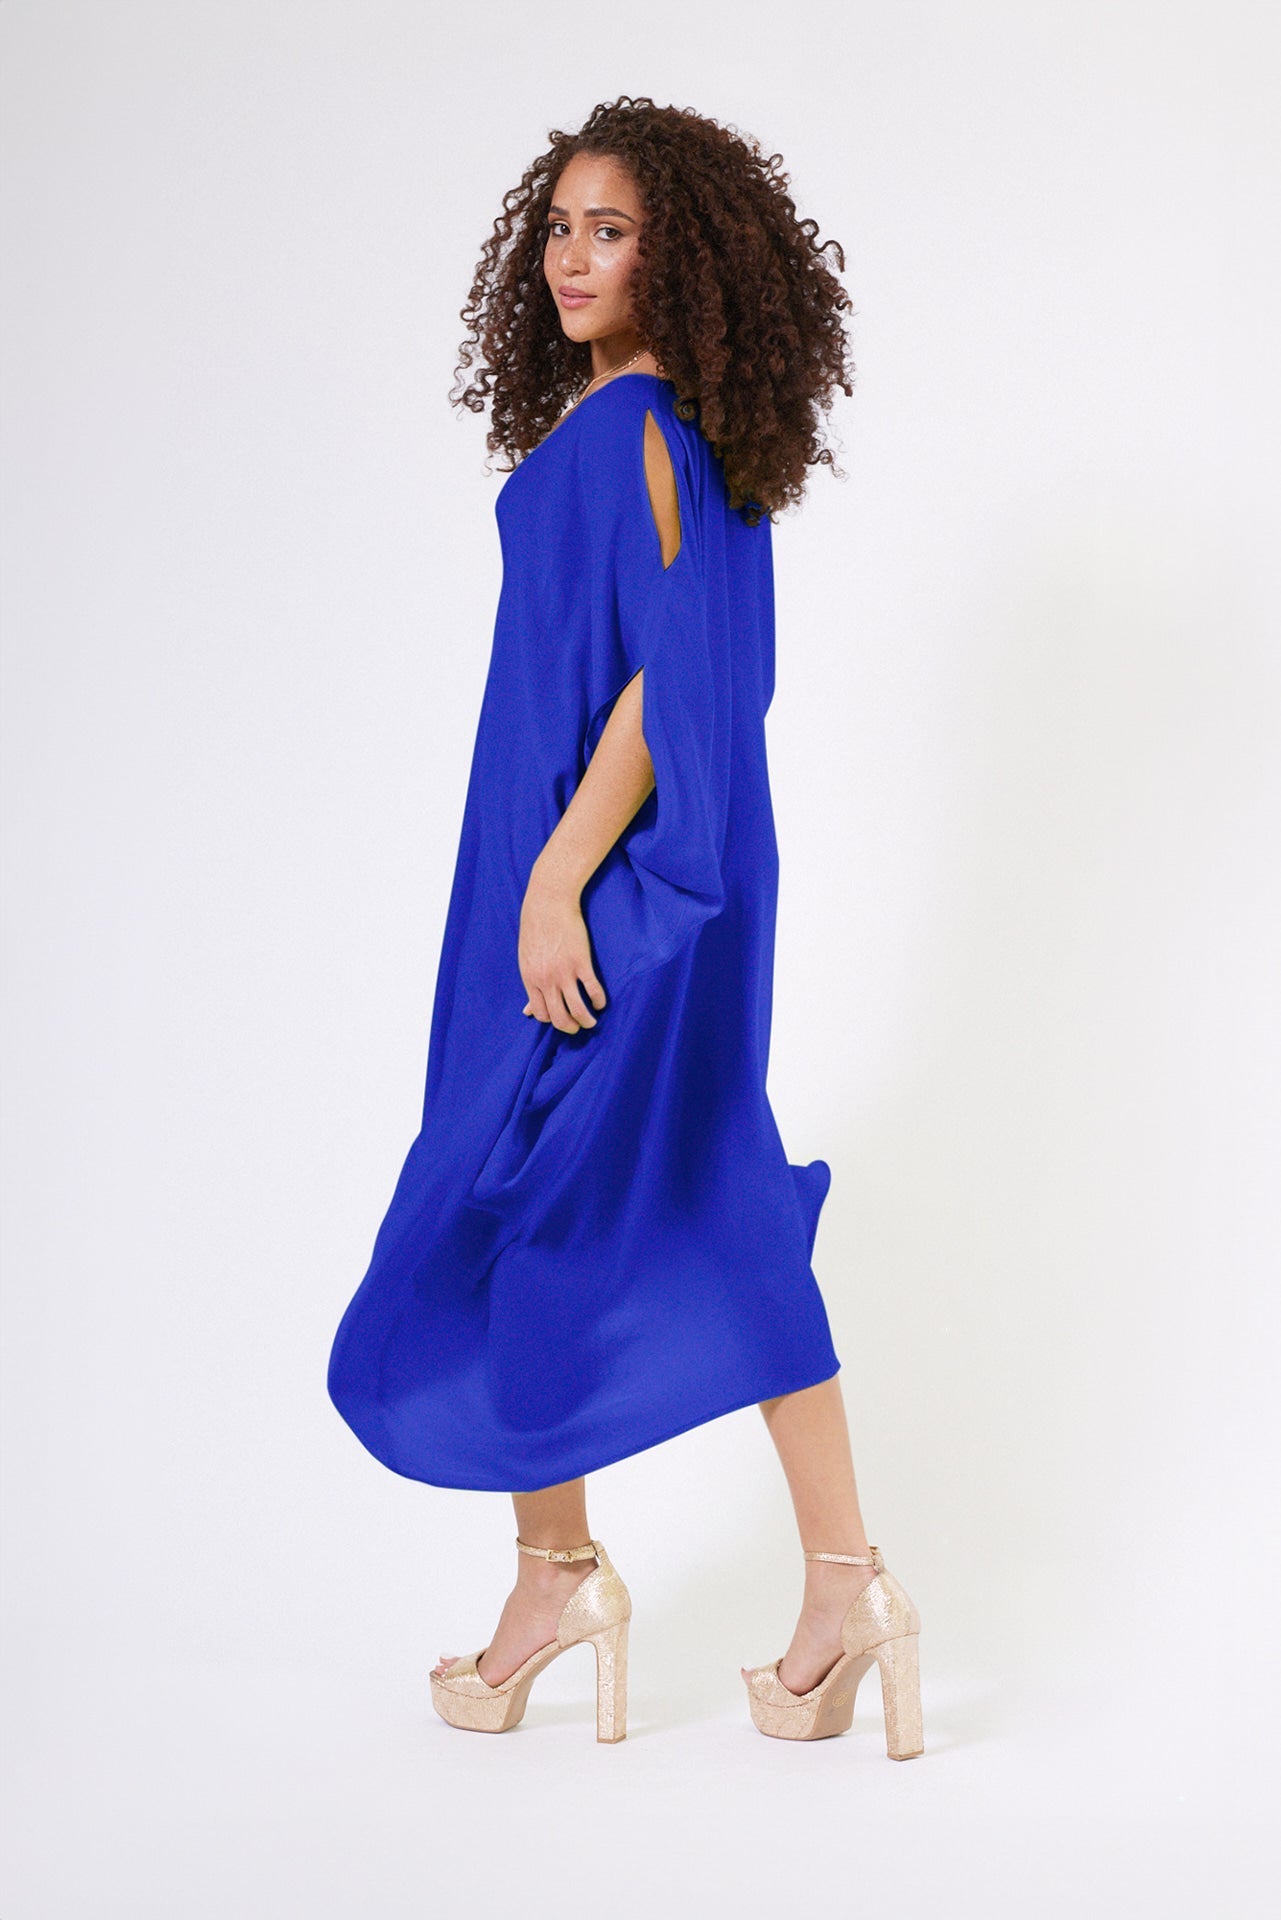 side profile view of woman wearing royal blue kaftan duster with front zipper made from recycled materials